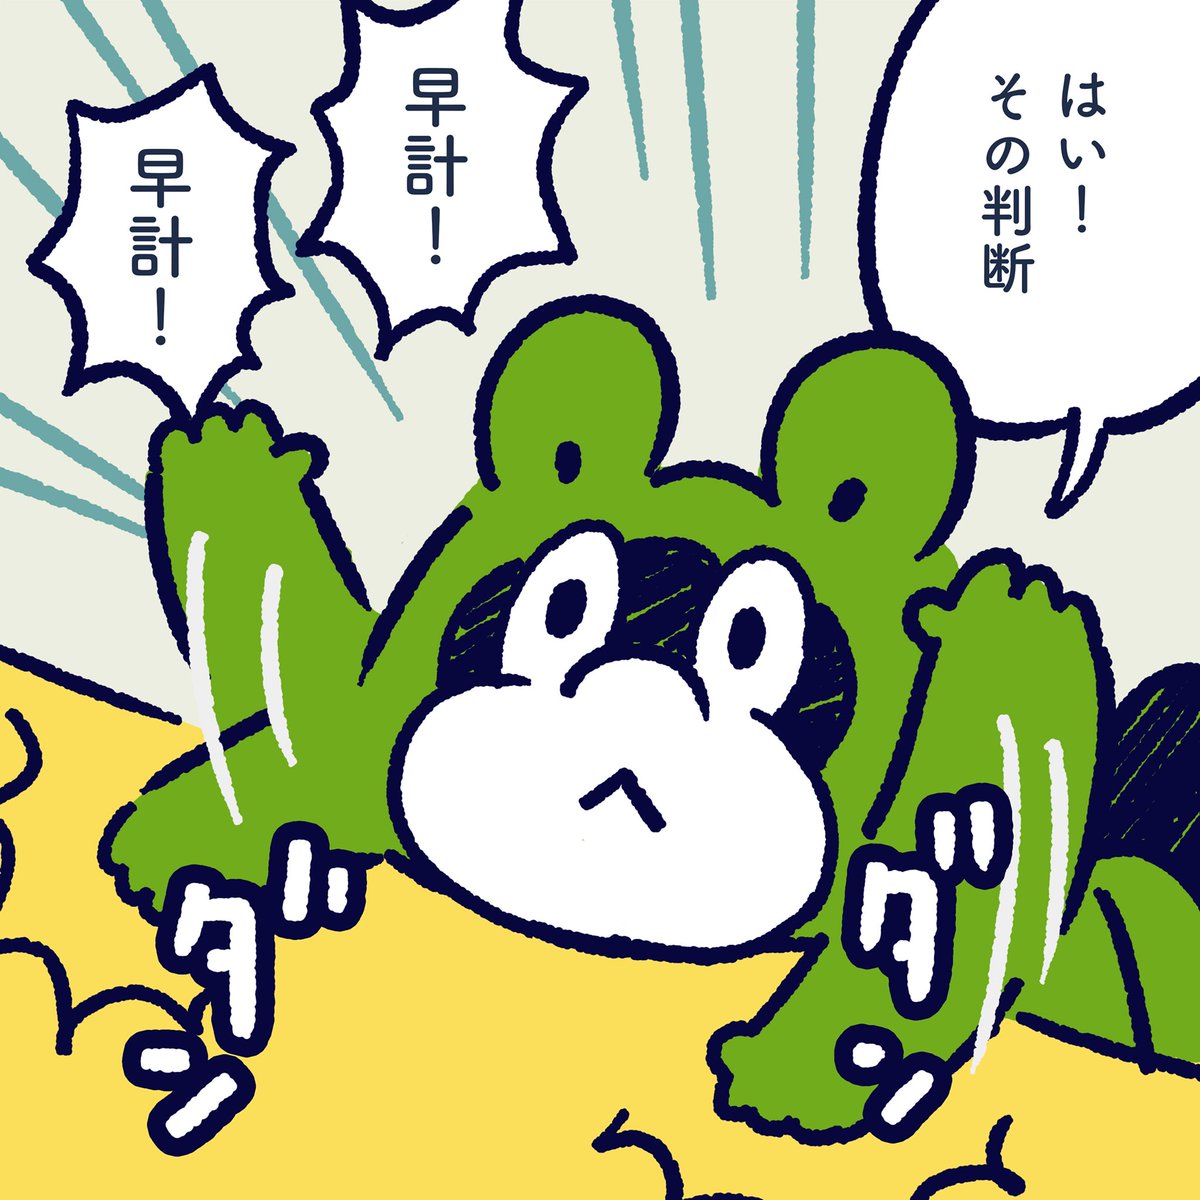 It is too early to conclude.too early!too early! #今日のポコタ #イラスト #マンガ 